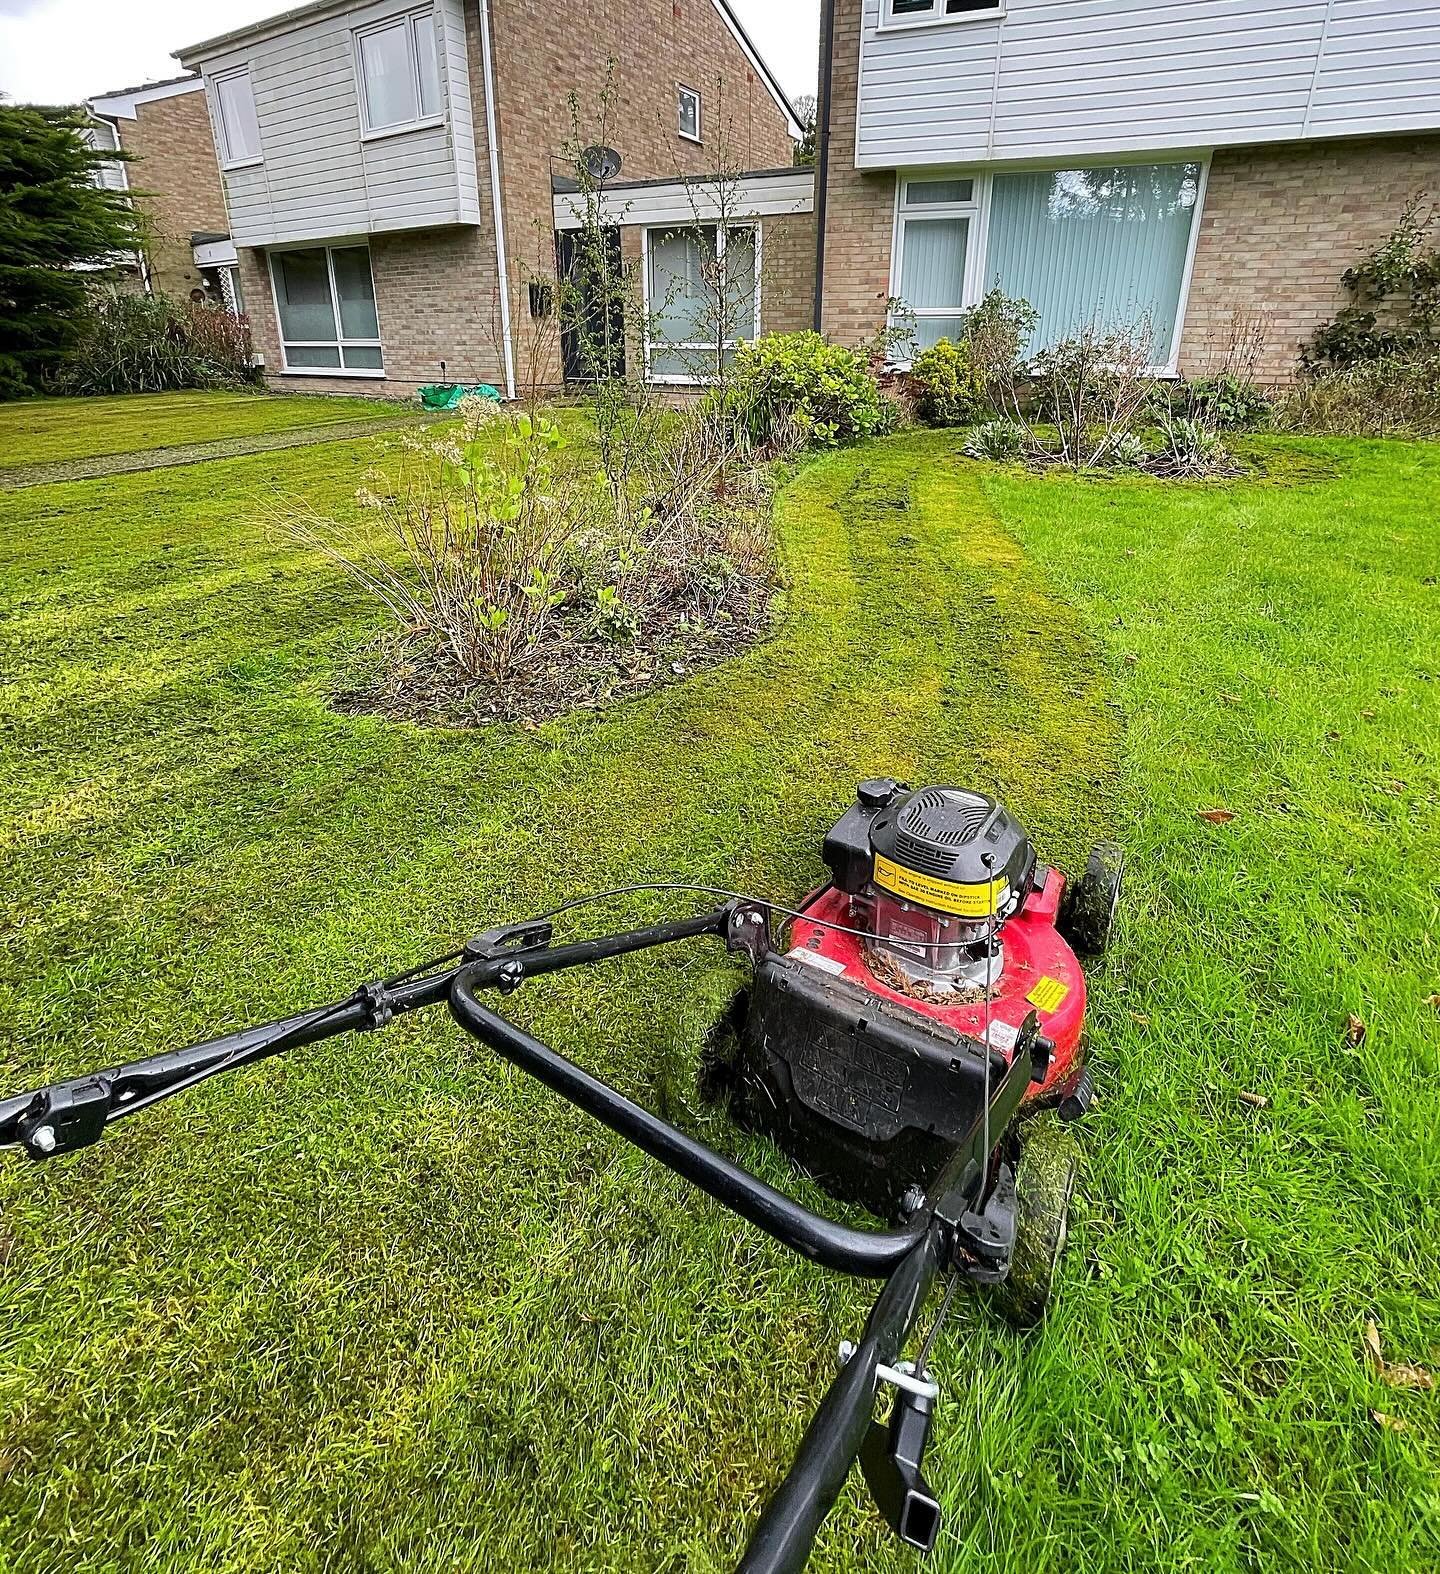 Satisfaction levels are high! Laying down some nice lines on our bi-weekly maintenance for these 3 gardens. #leafitout #grasscutting #kent #gardening